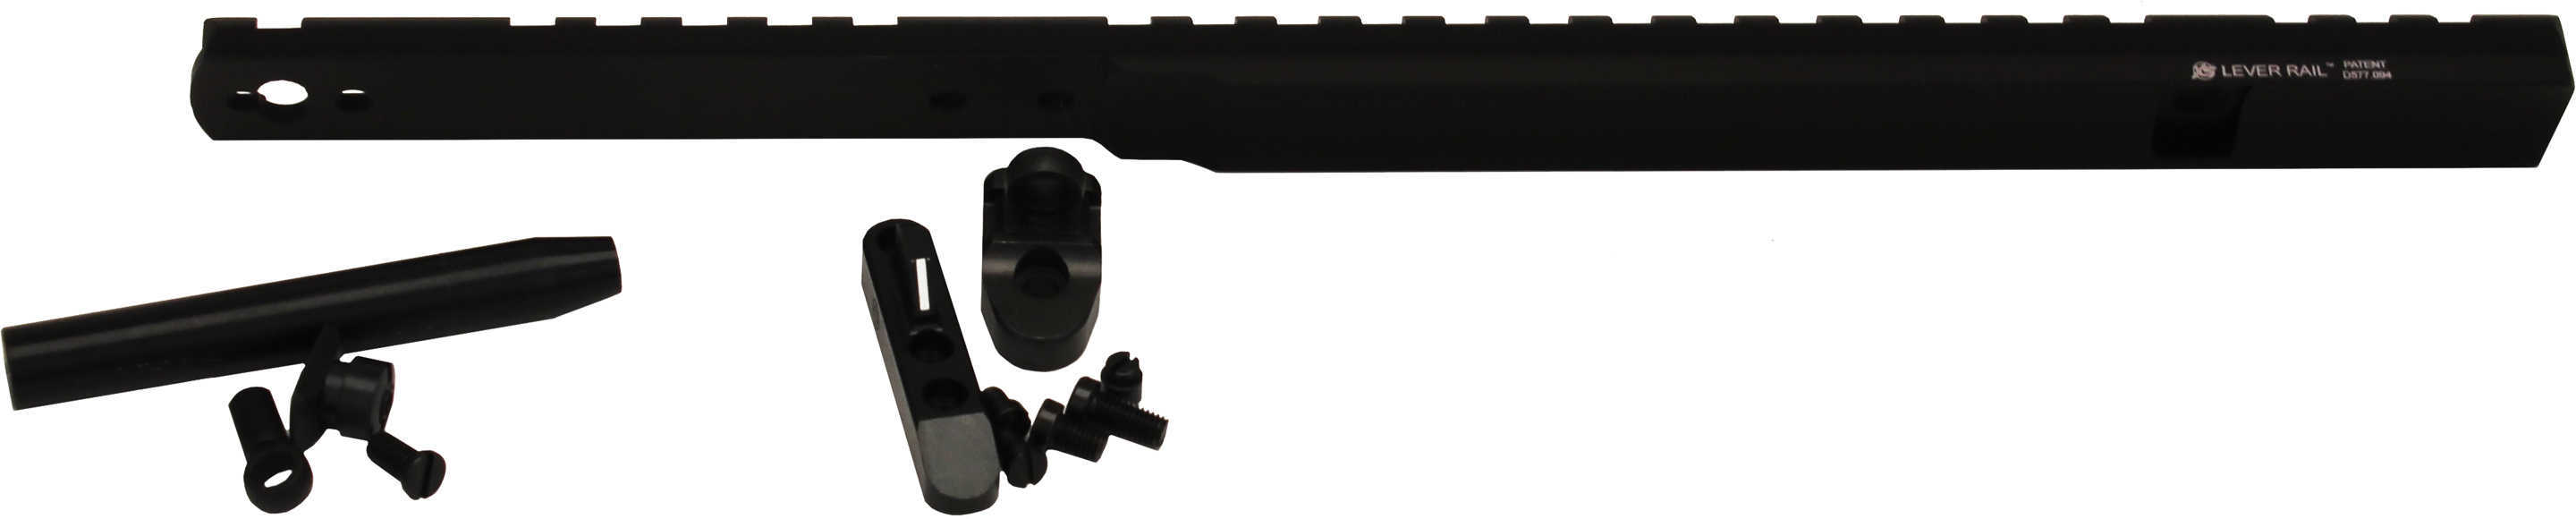 XS Sight Systems XS Lever Rail Ghost Ring Set Marlin 1895 Md: ML-1001-5